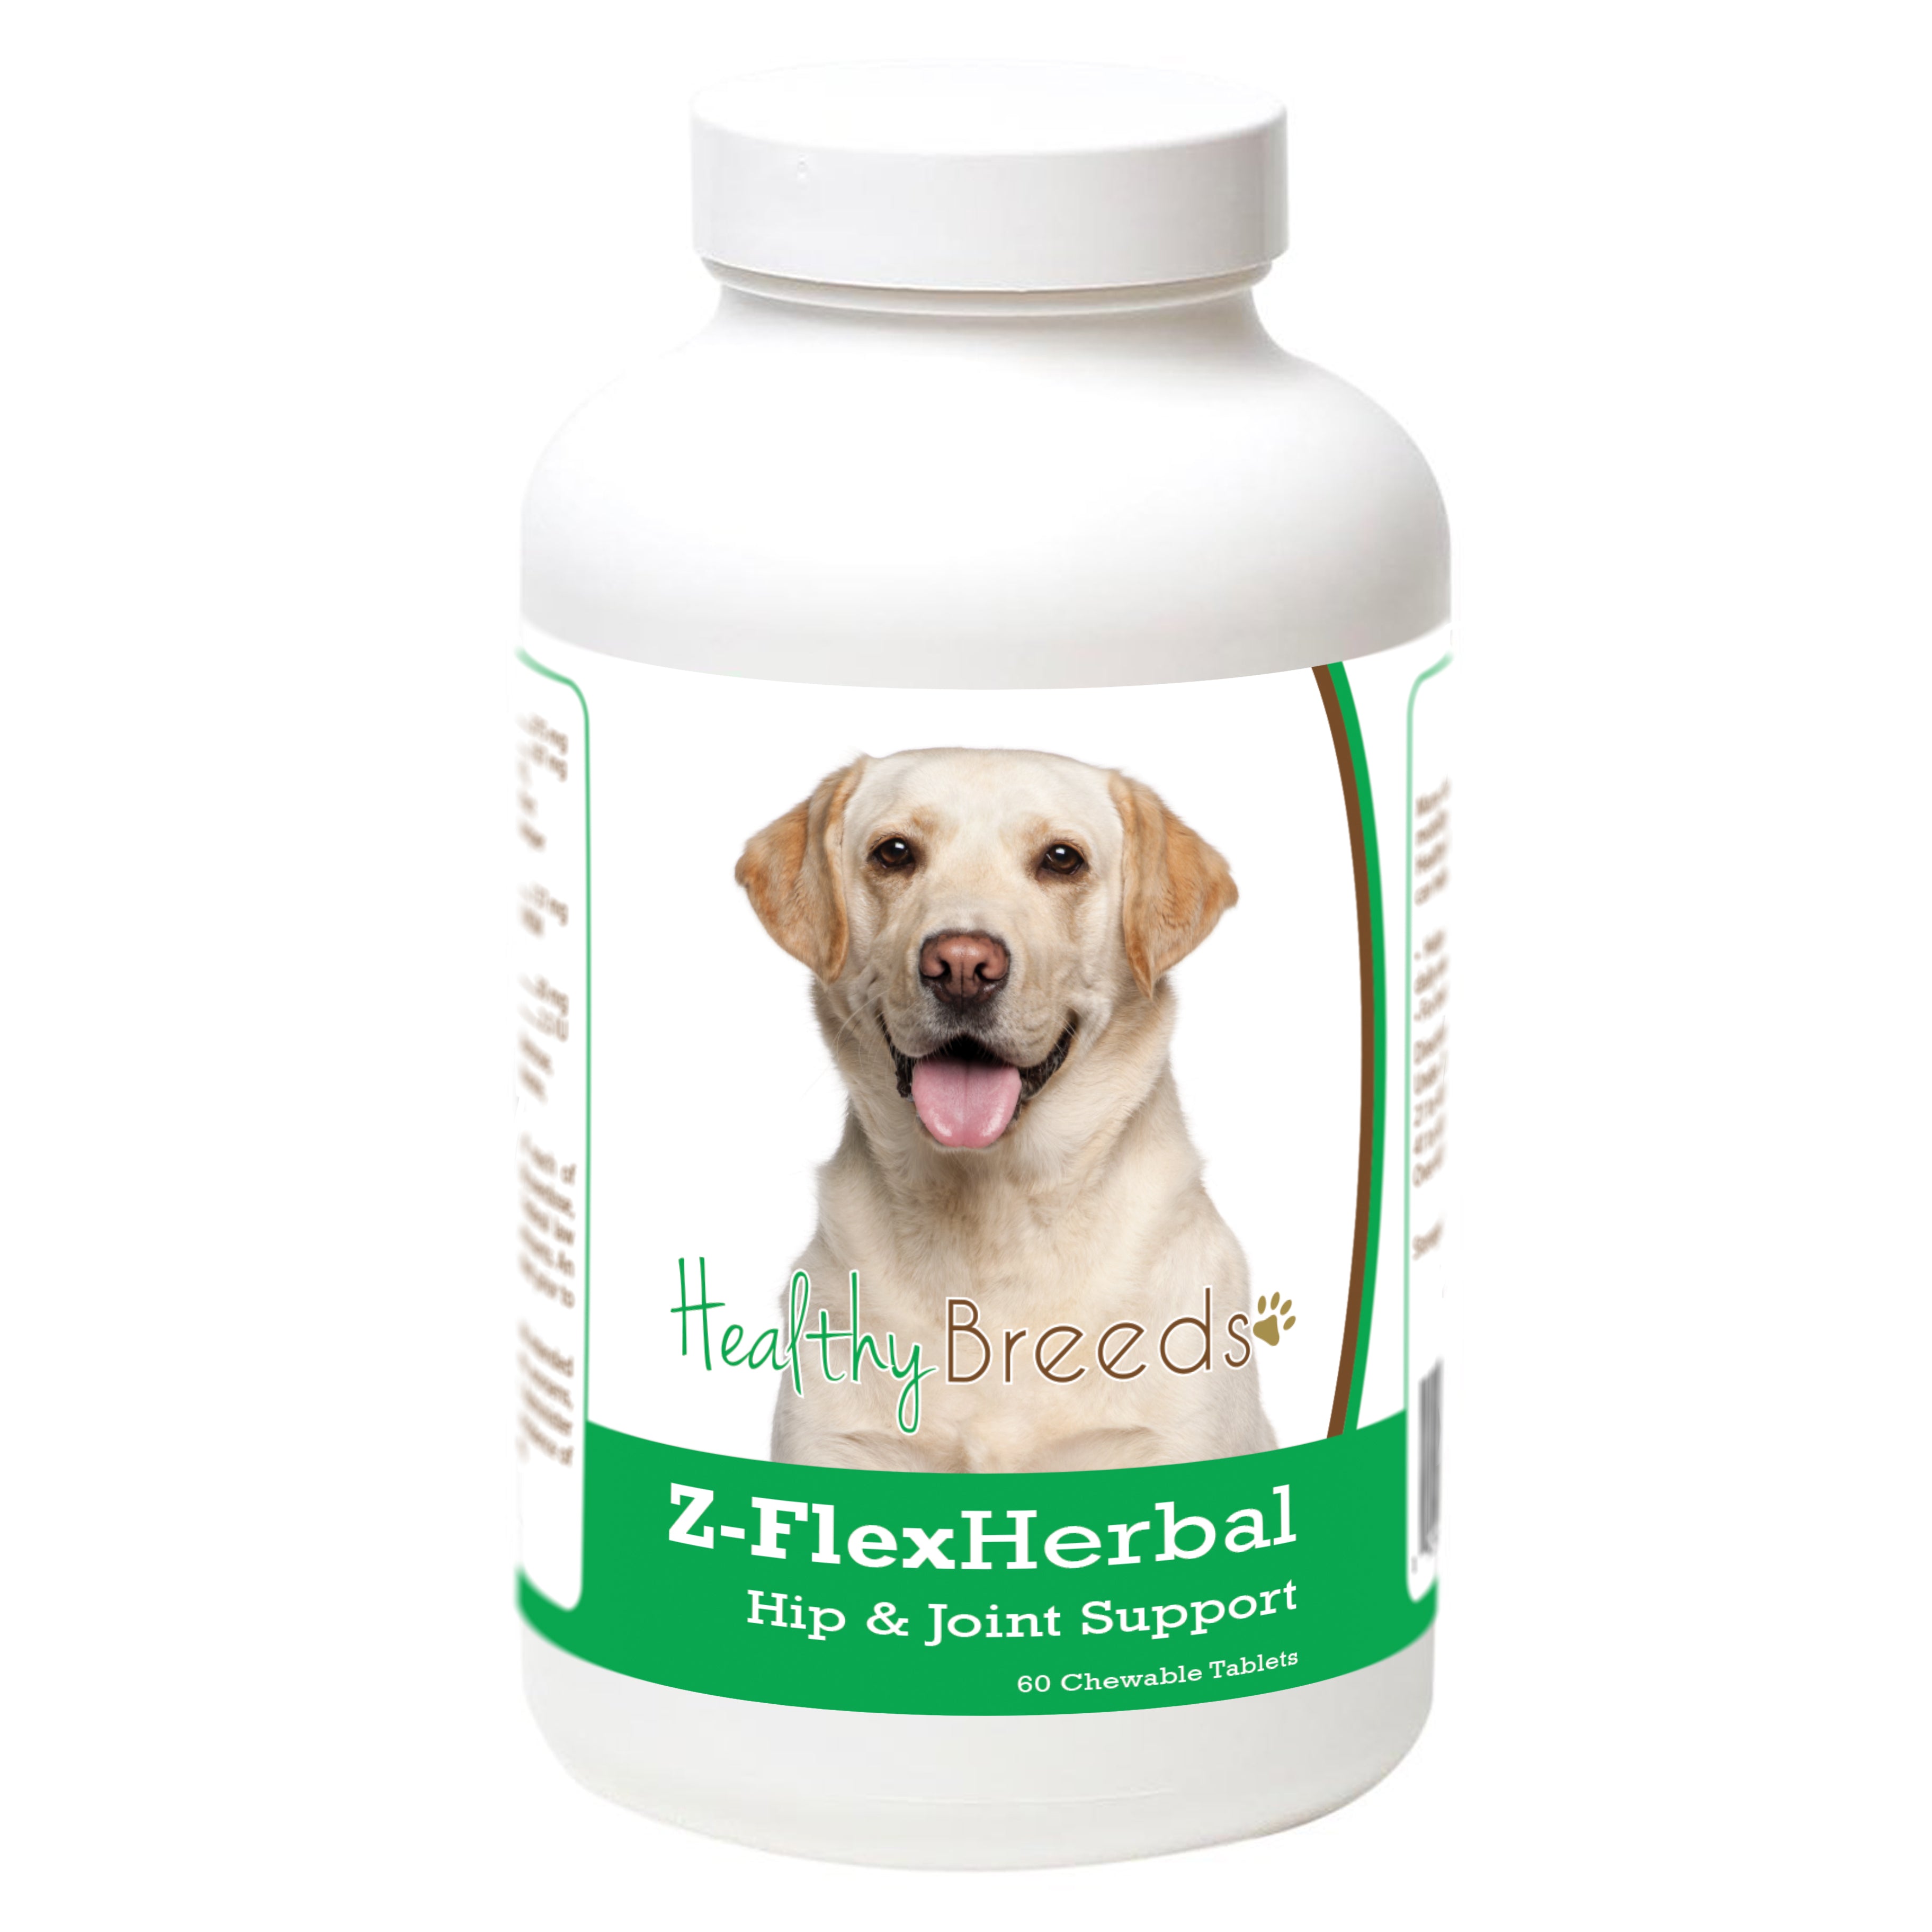 Labrador Retriever Natural Joint Support Chewable Tablets 60 Count